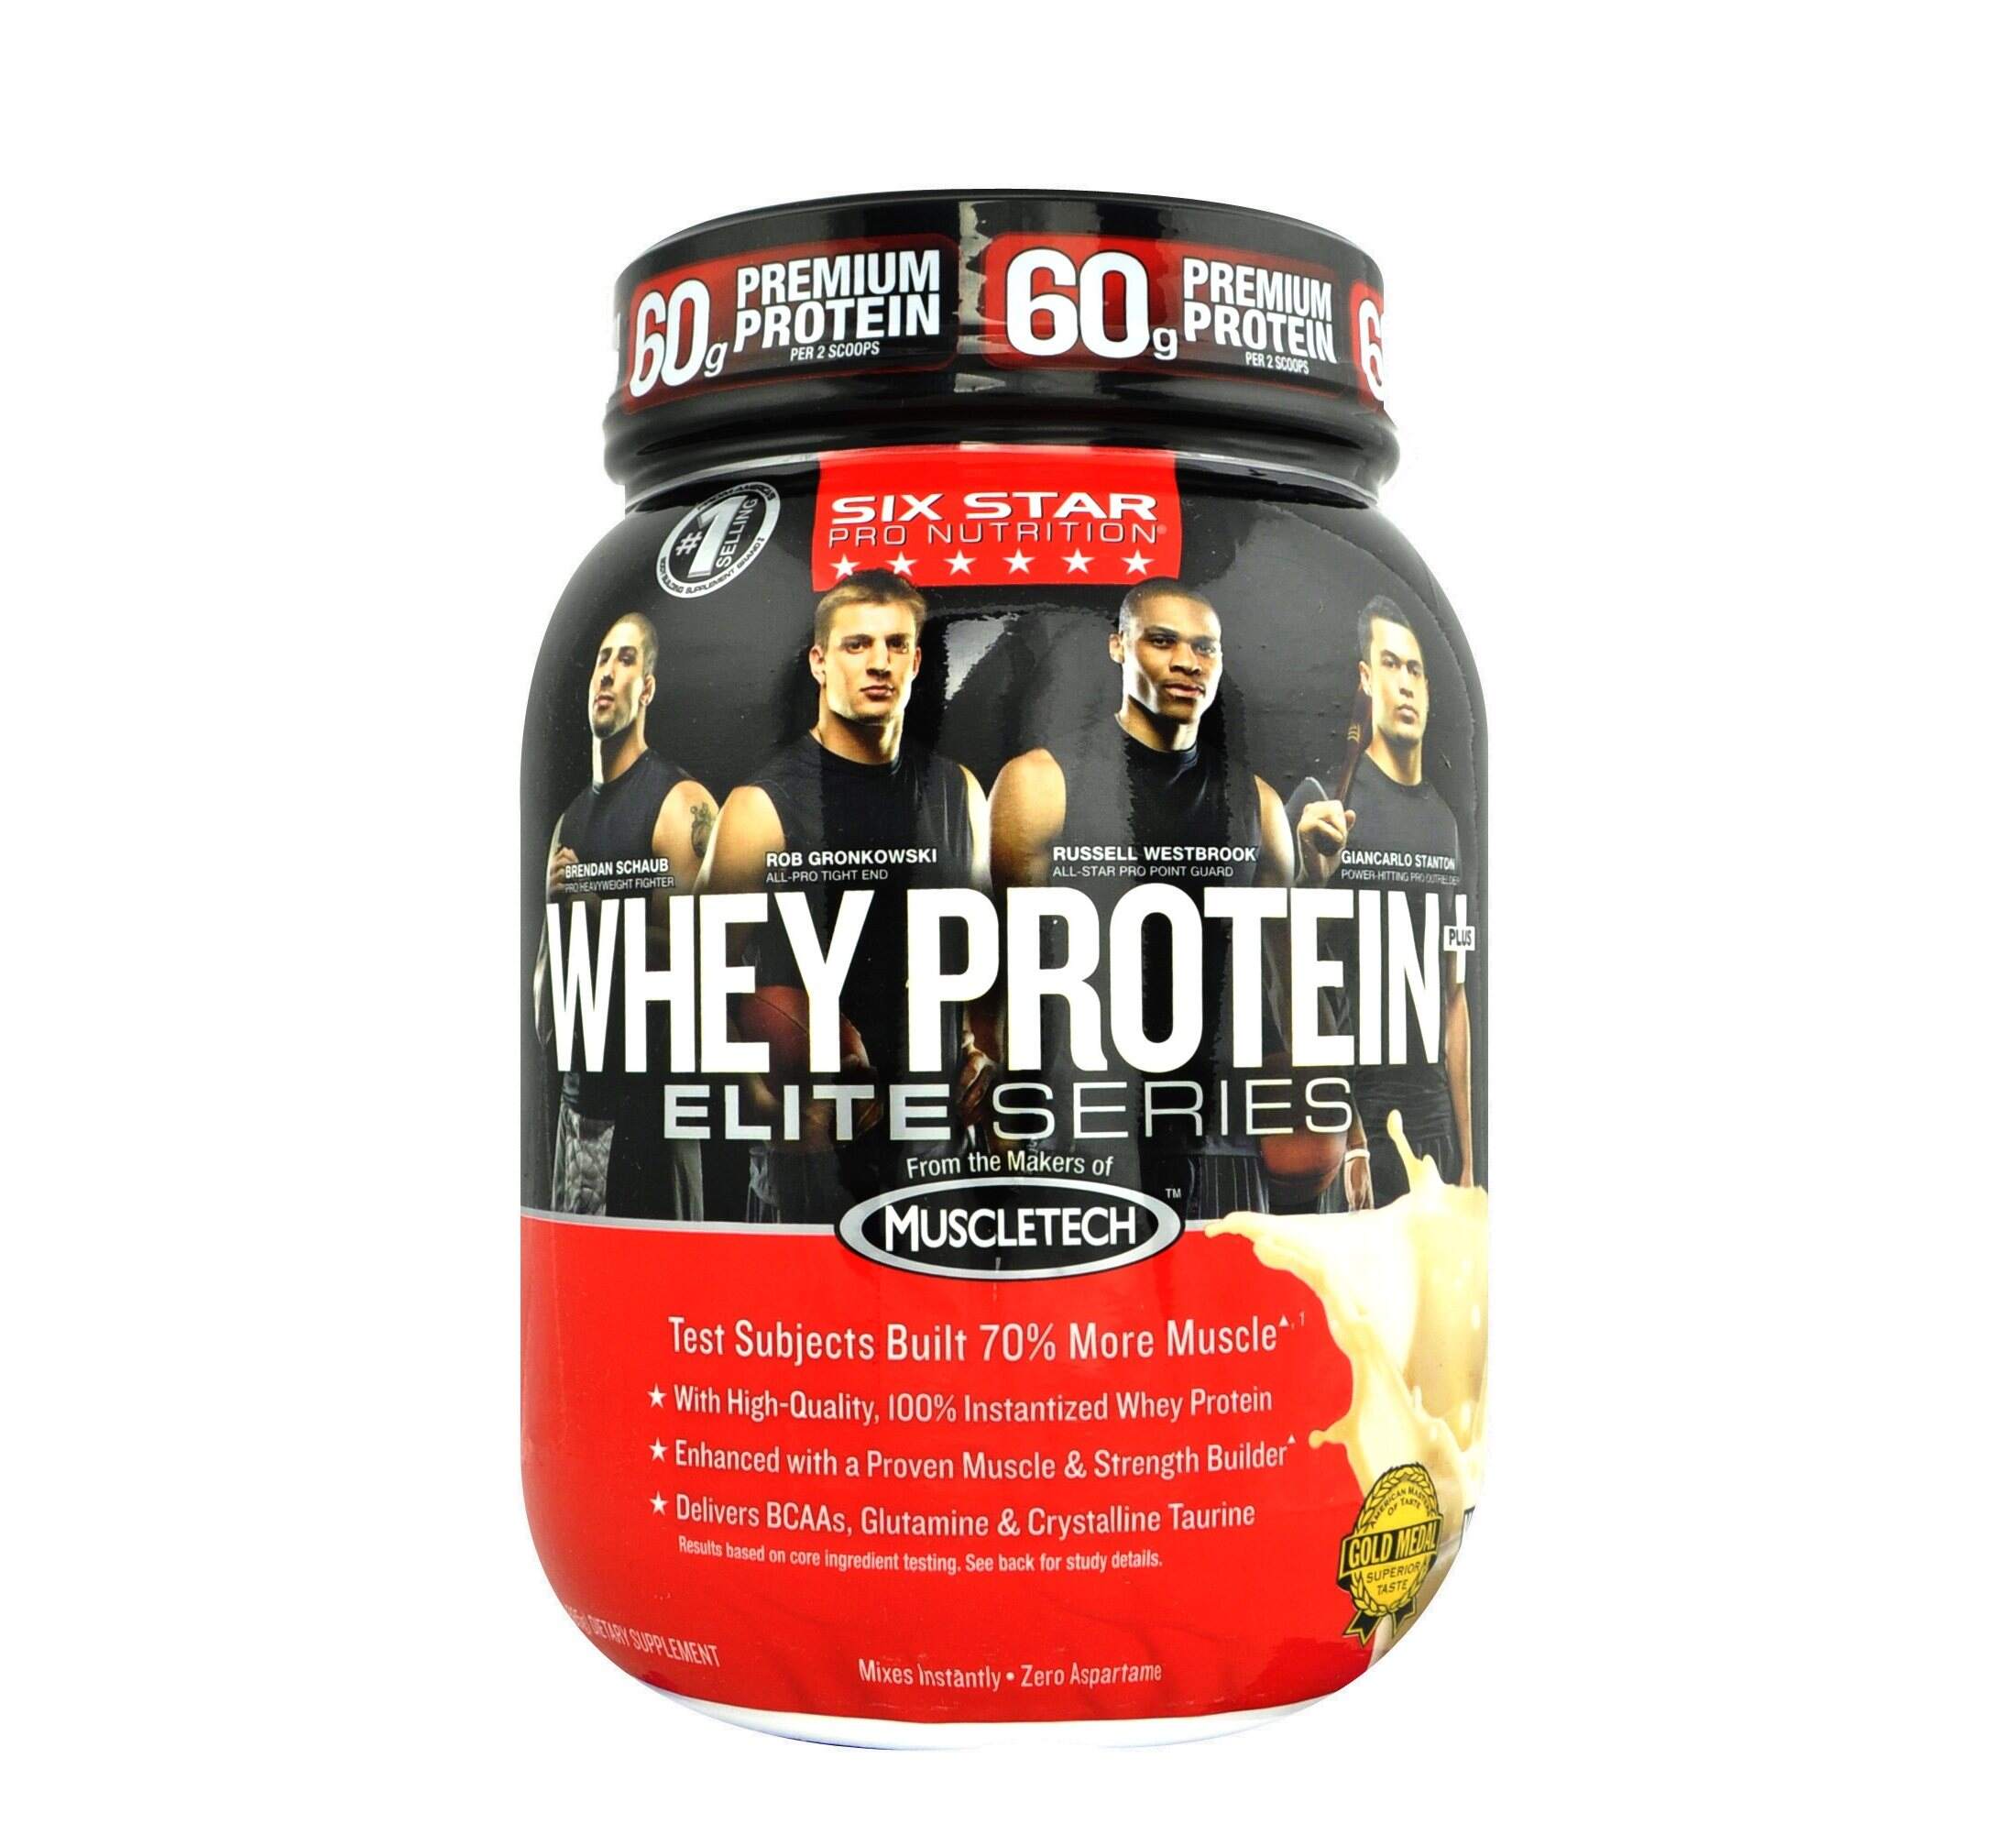 18-whey-protein-elite-series-nutrition-facts